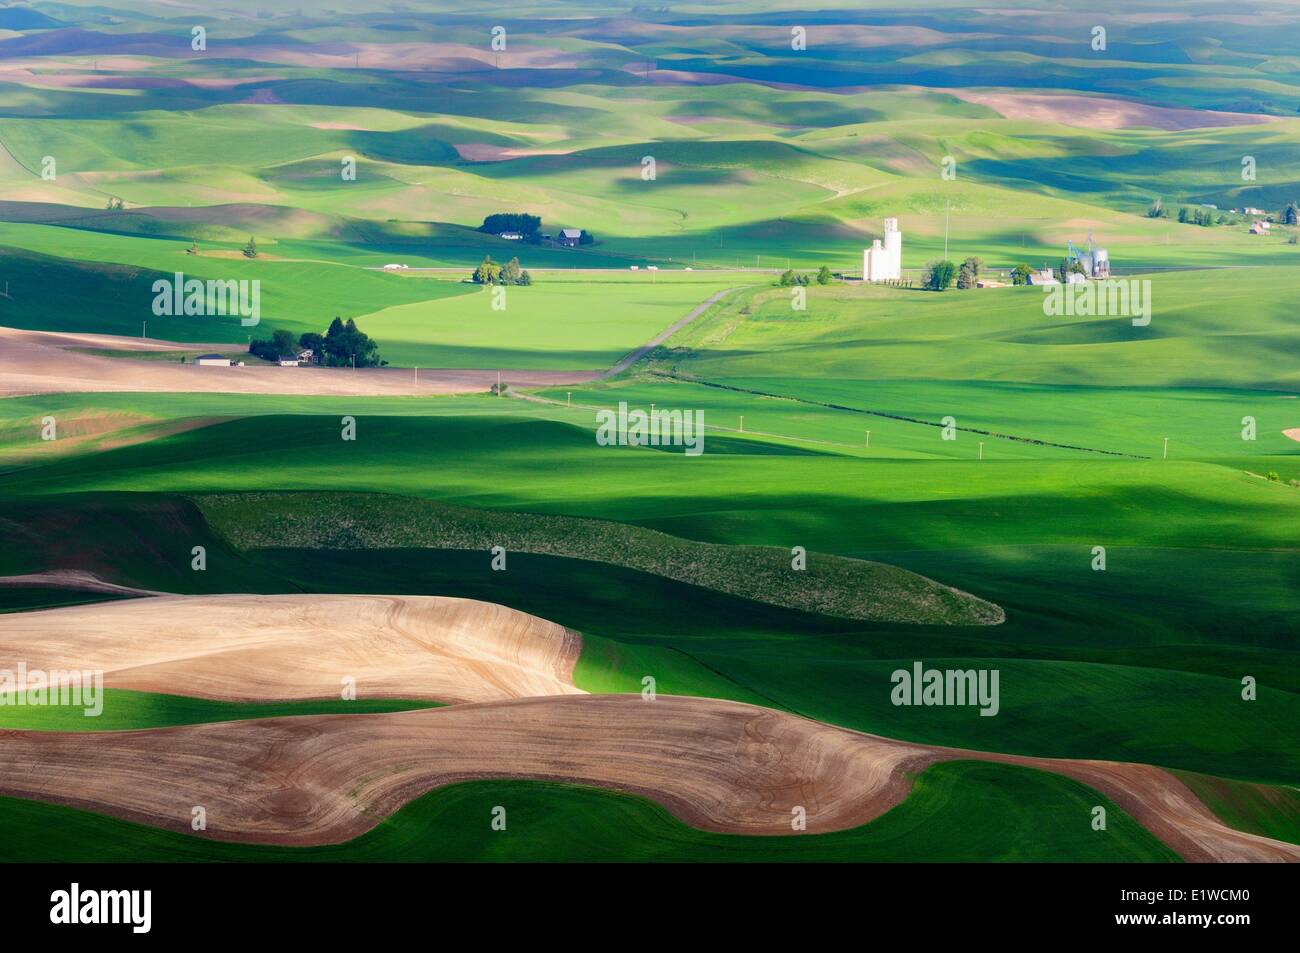 A silo, farms and rolling farm land in the Palouse region in Washington State, USA. Stock Photo